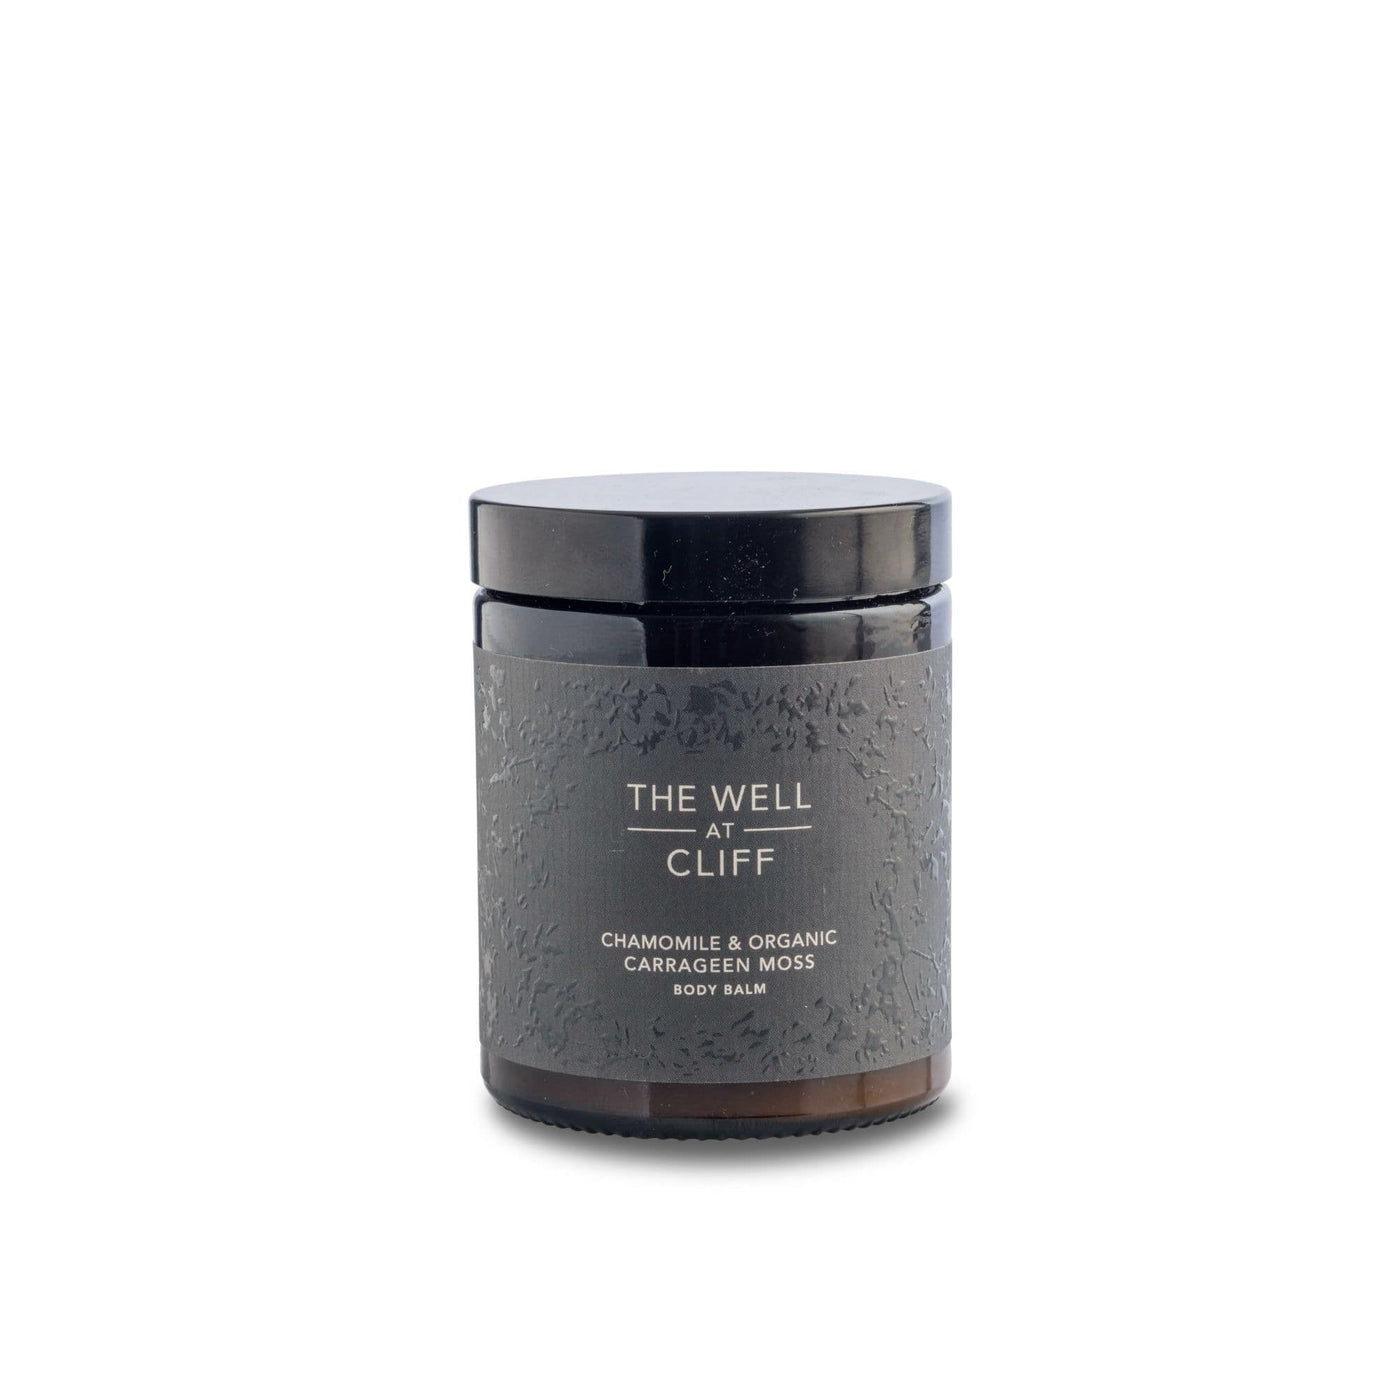 The Well at CLIFF Body Balm